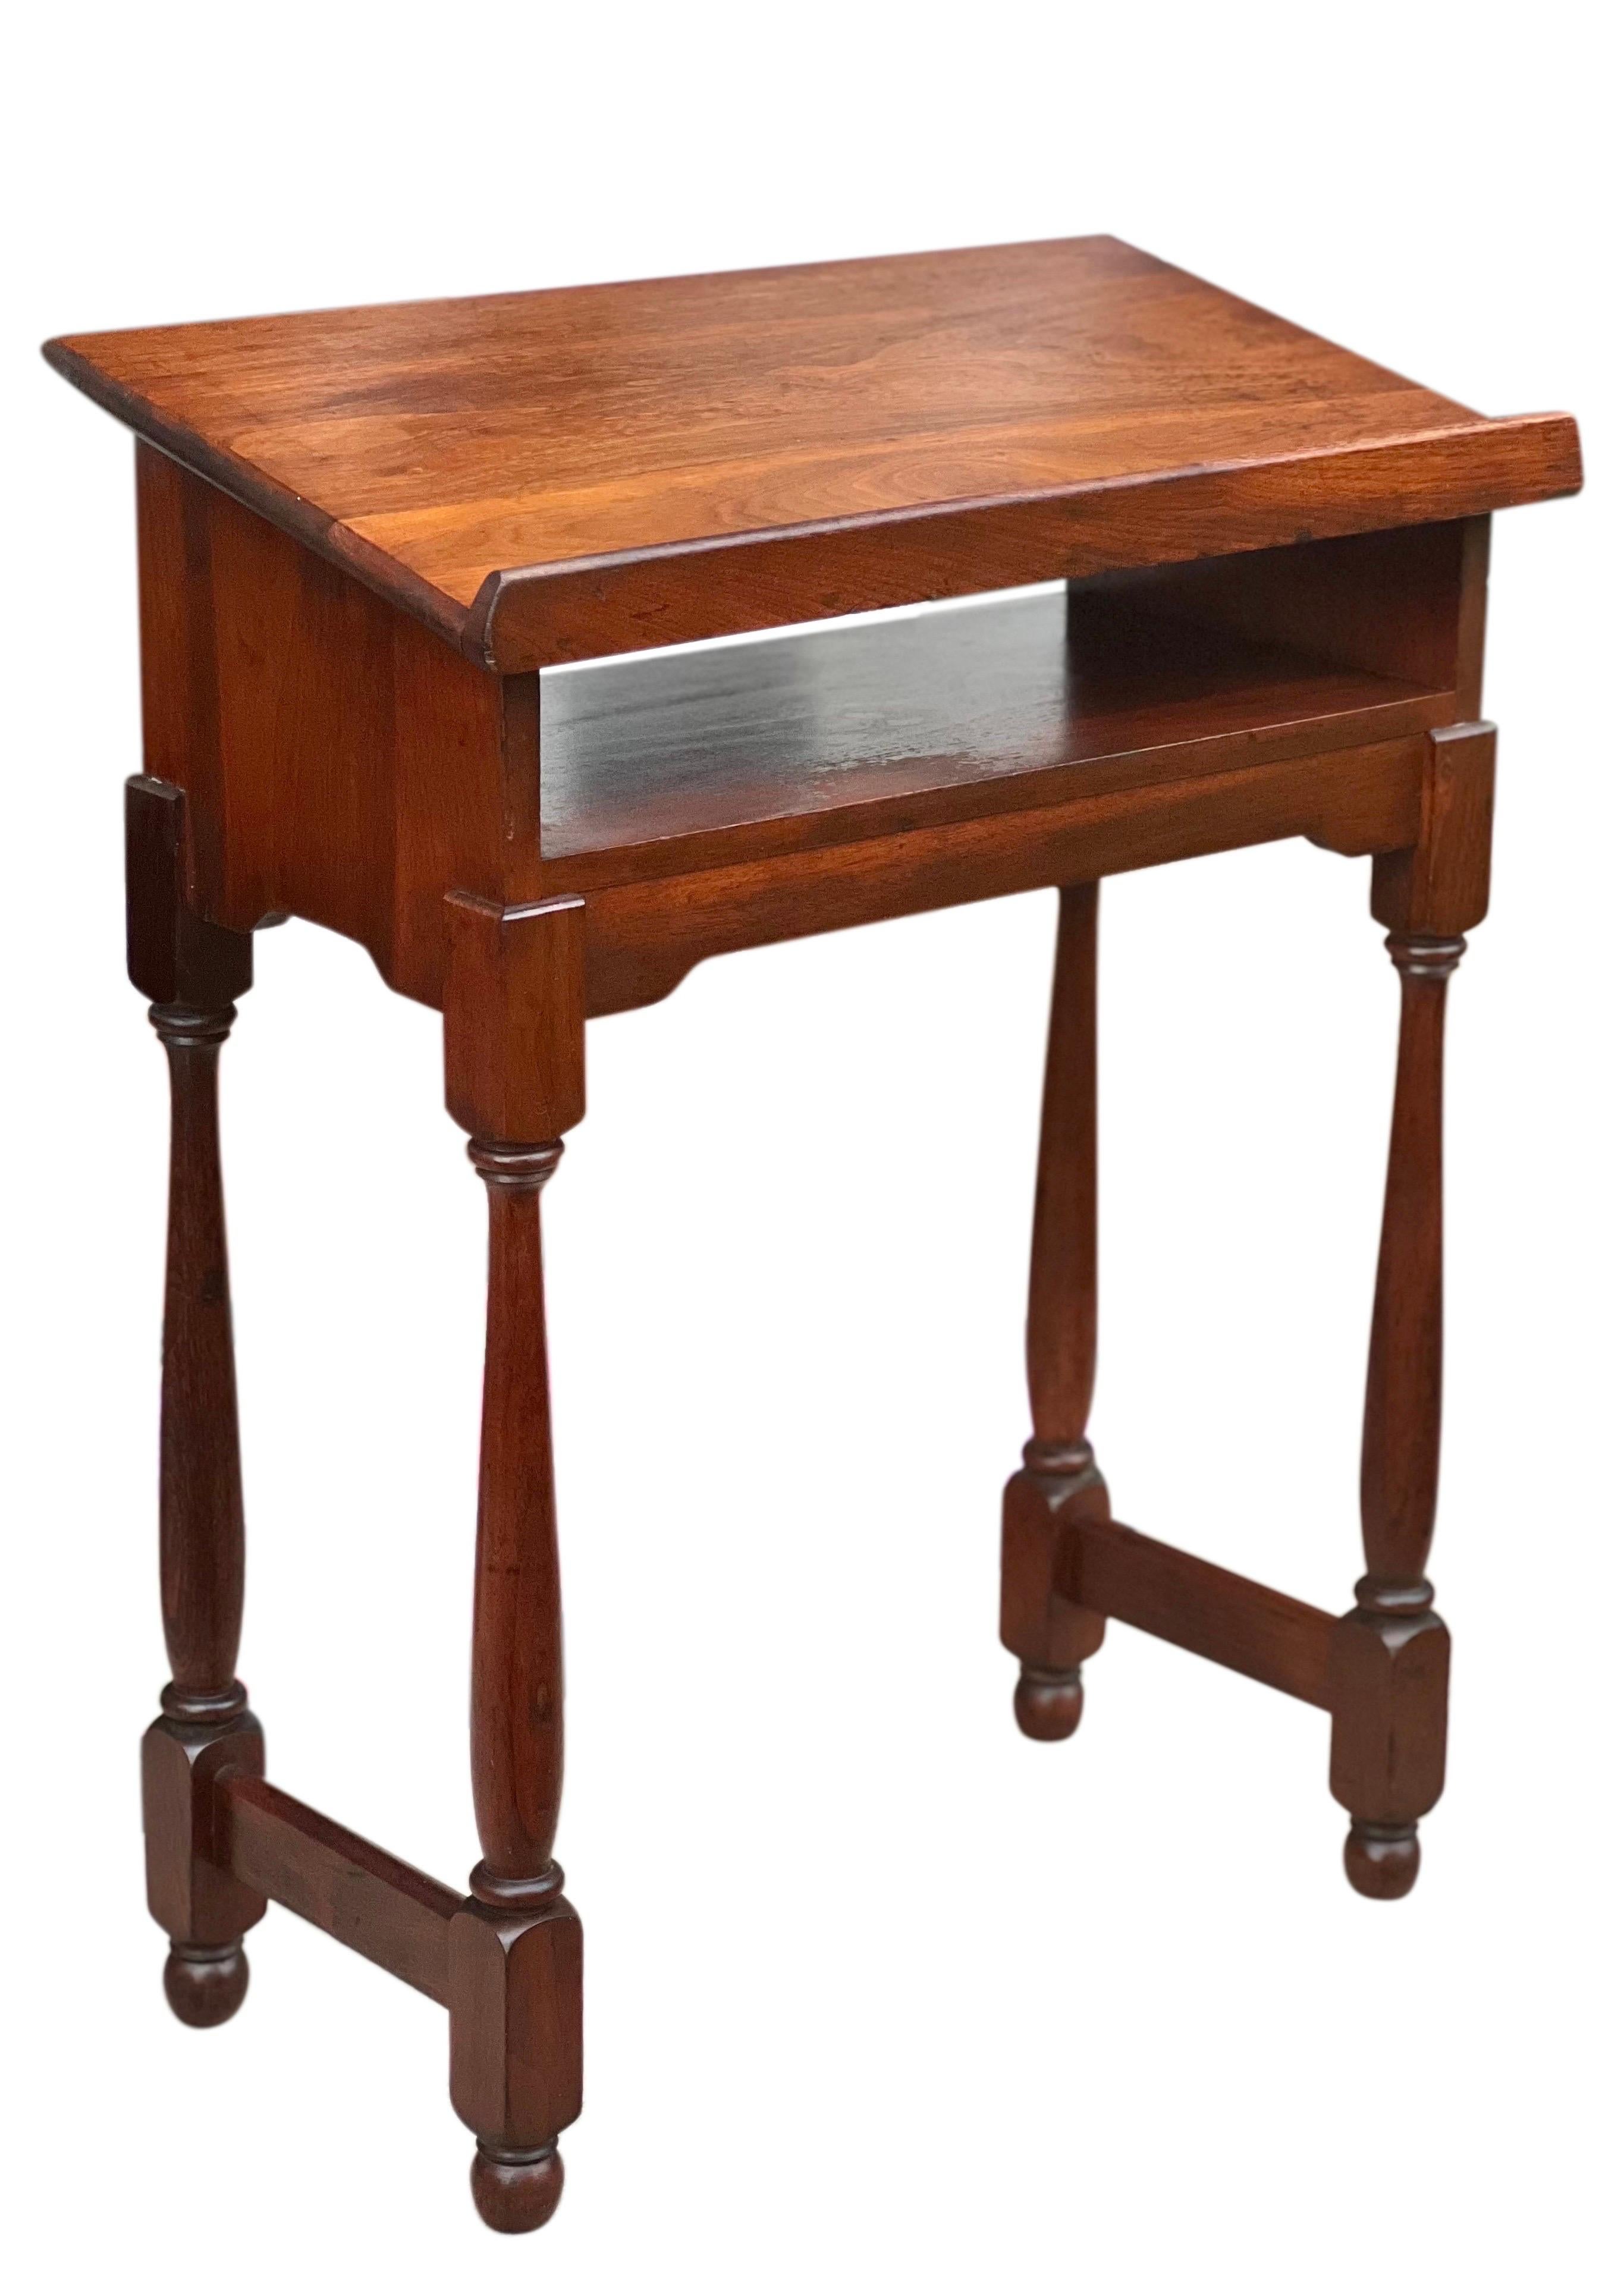 Antique Colonial Revival small walnut lectern, c. 1910-20.

Wonderful lectern with rich walnut grain features classic slanted top, elegant turned spindle legs and lower open shelf. Lovely in a room or entry way to display a beautiful book, album or